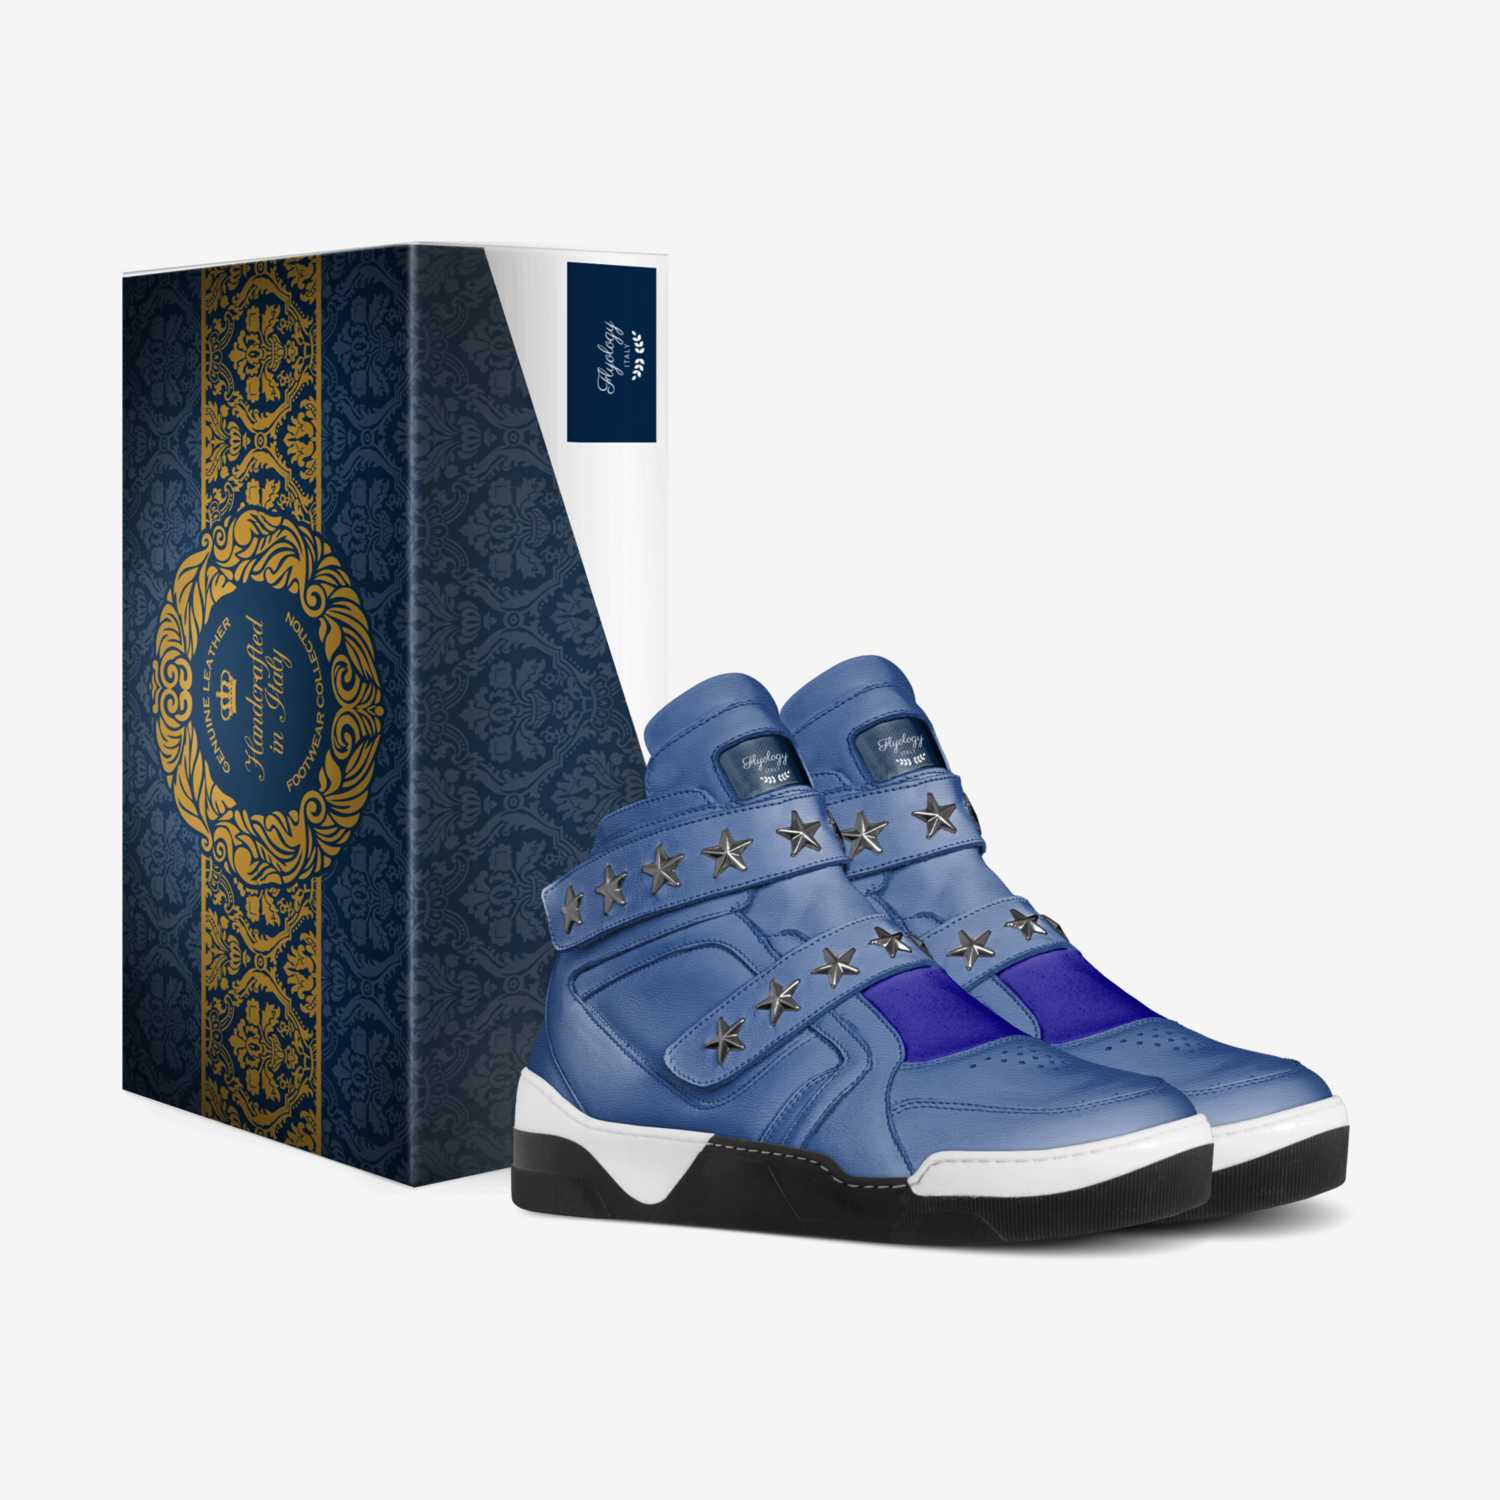 Flyology  custom made in Italy shoes by Flyology Italy | Box view